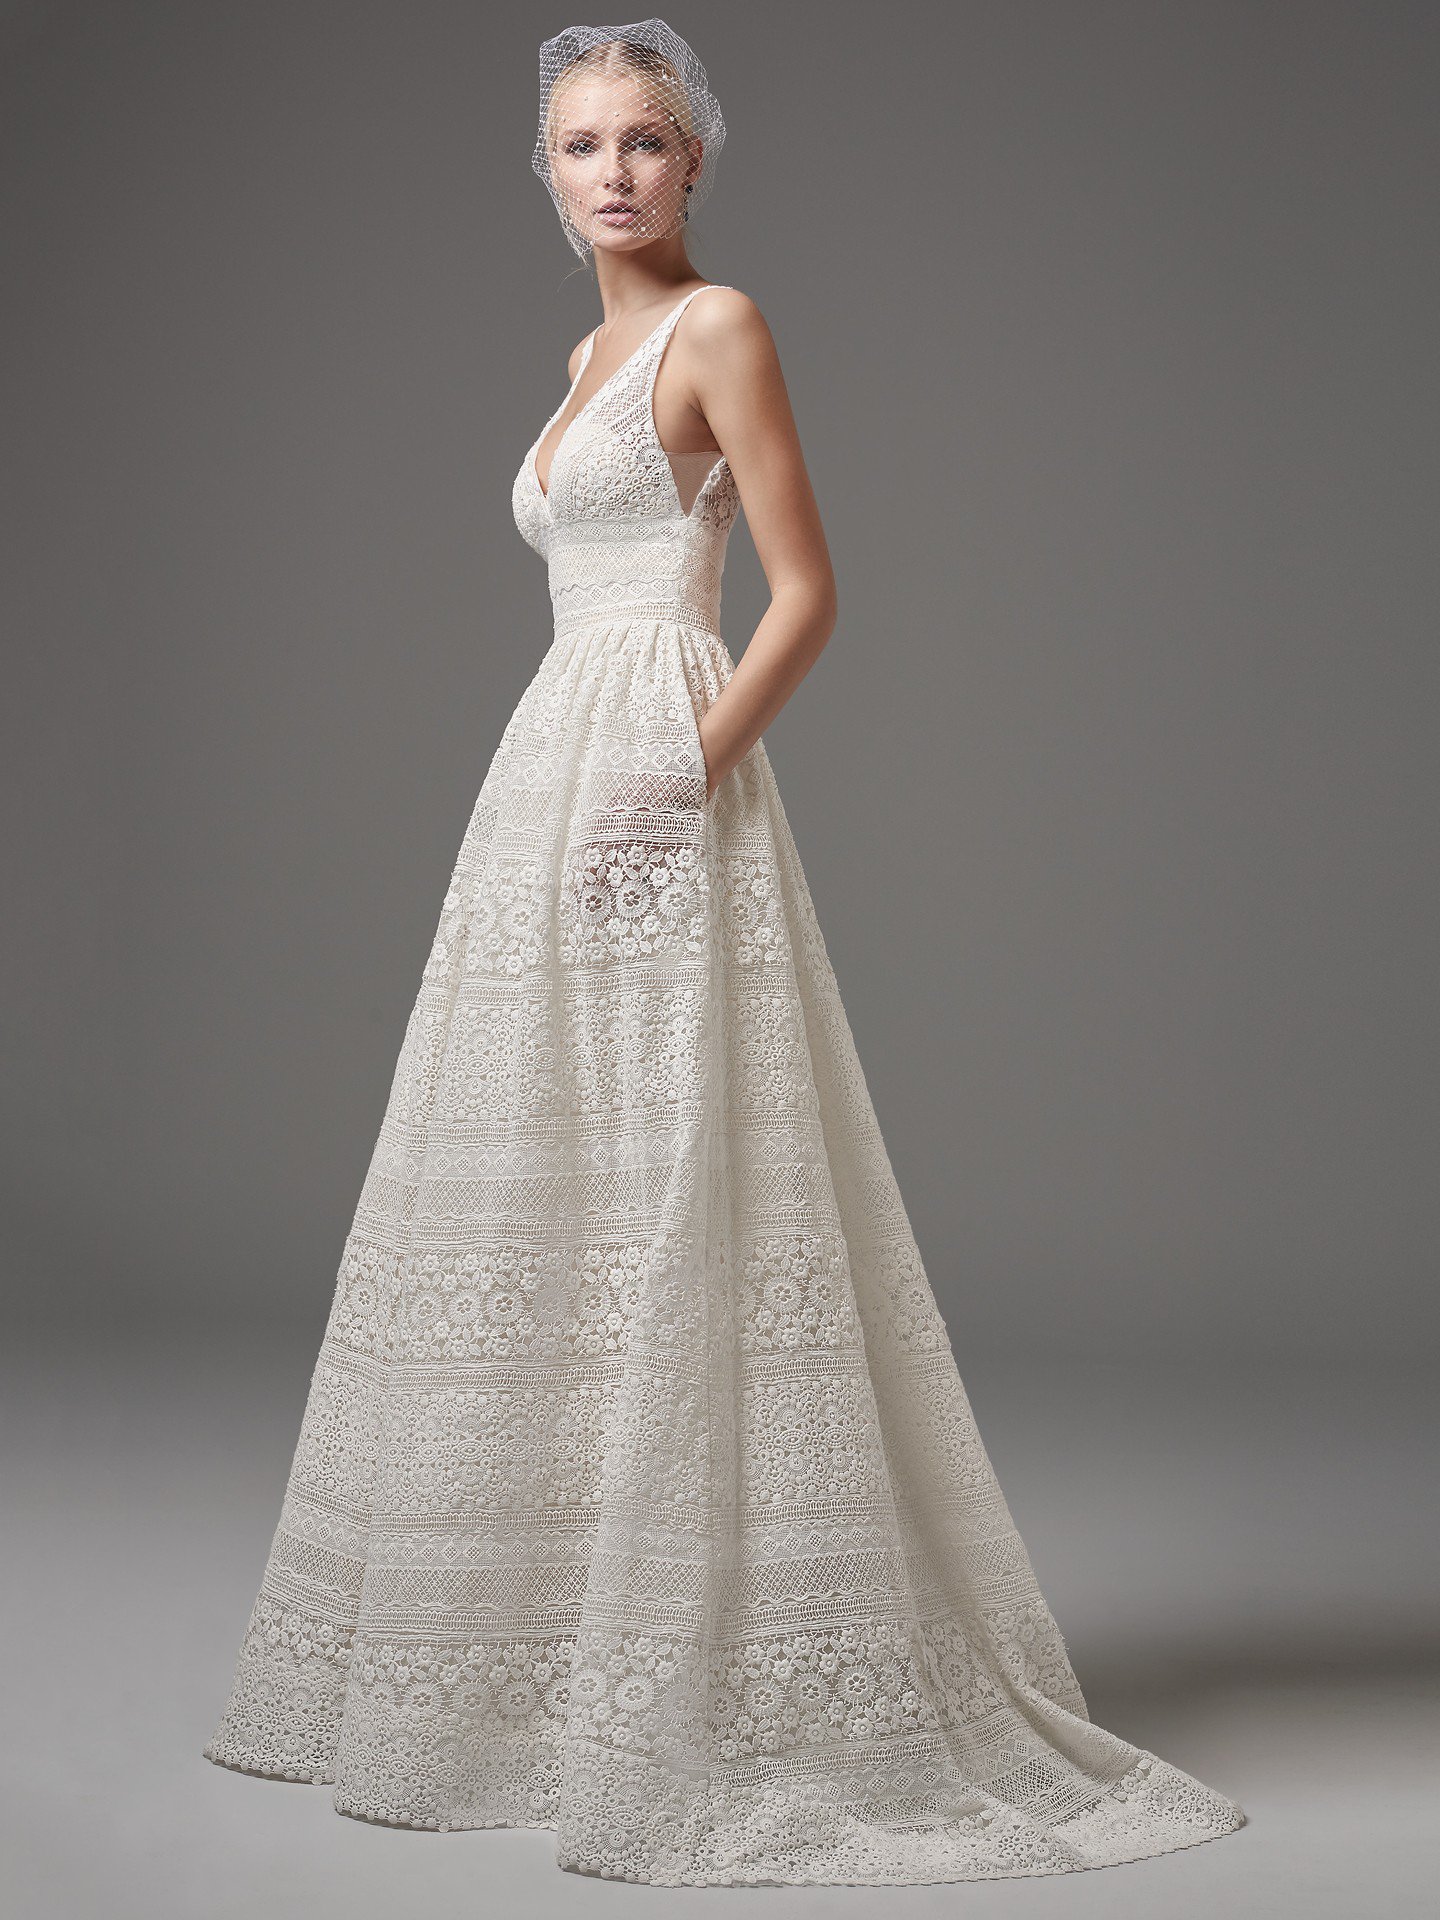 EVAN This chic, boho-inspired A-line features sheer pockets and patterns of eyelet lace, floral motifs, and scalloping. Sheer lace straps complete the V-neckline and sexy square-back. Finished with zipper closure. Detachable tulle overskirt with lace waistband sold separately.